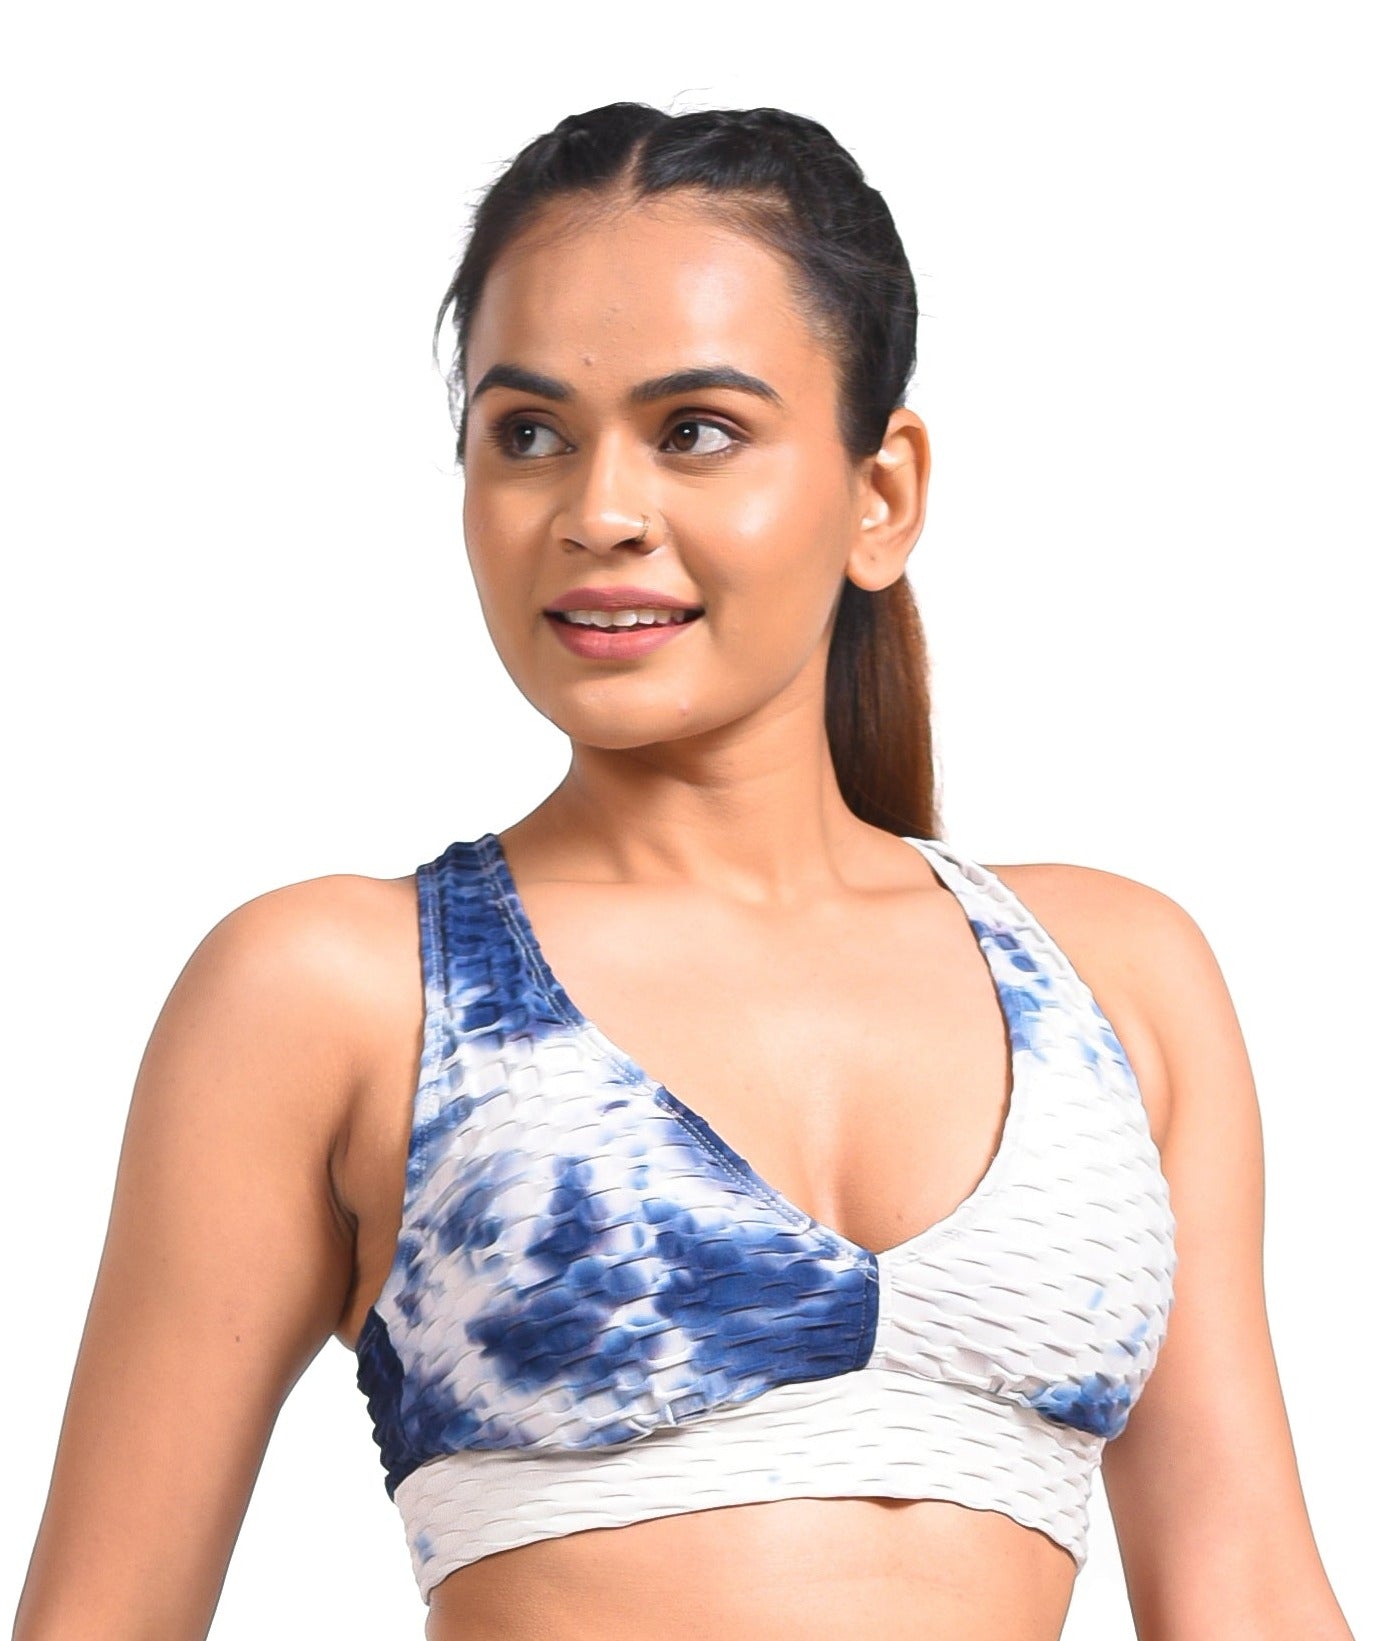 Shop for Women Sports Bra Online at Best Price in India